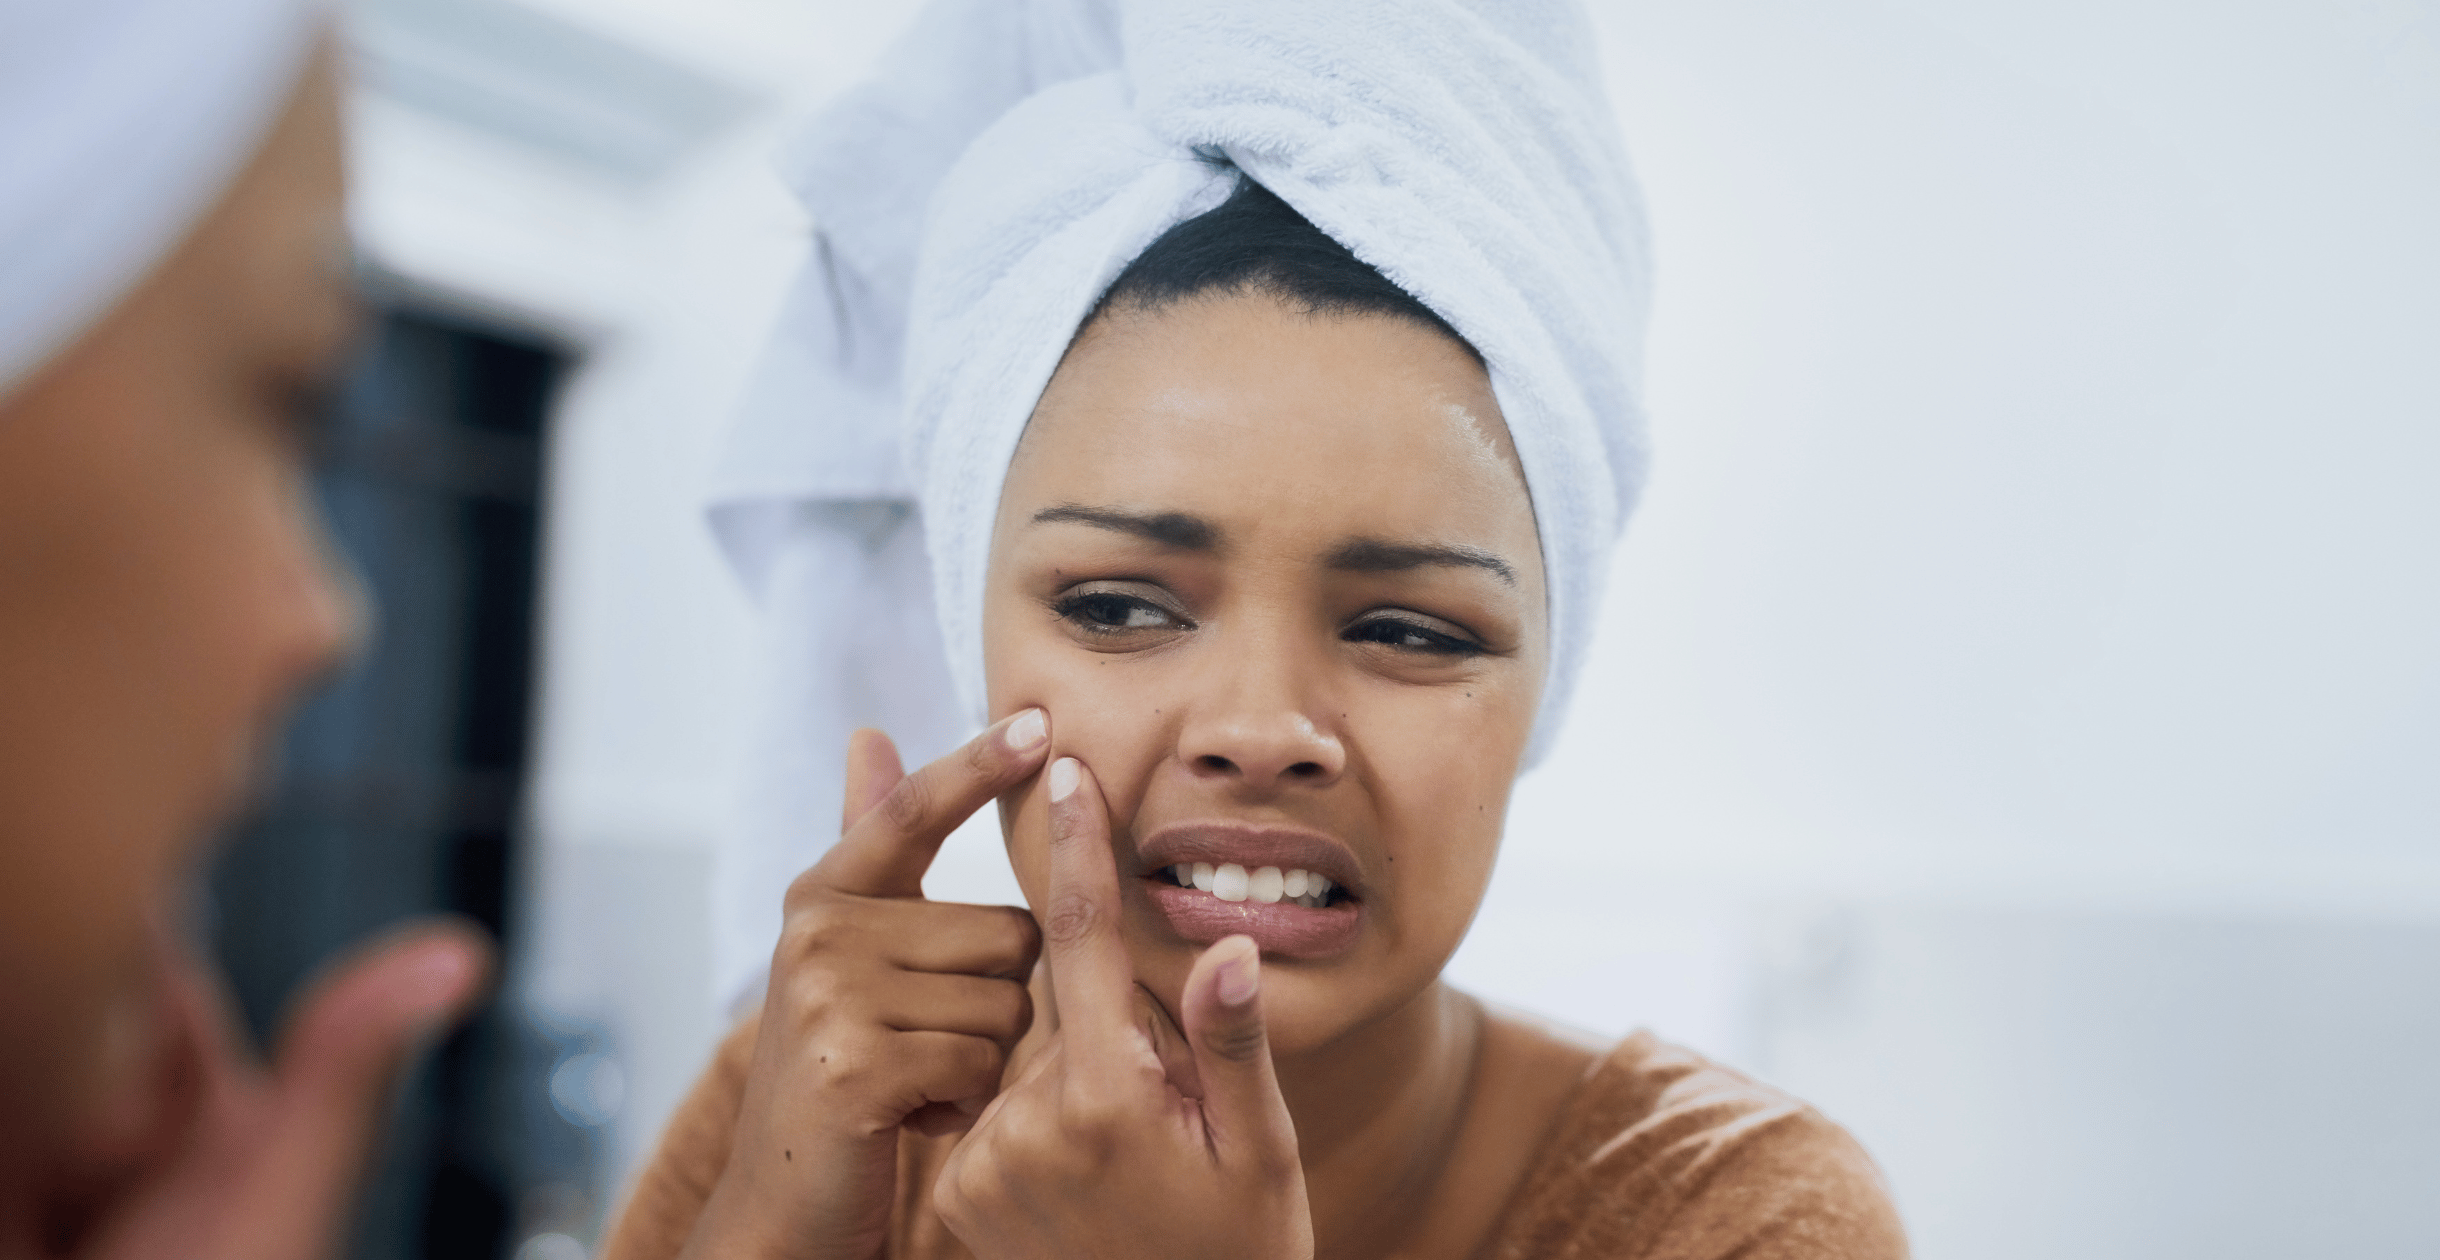 Doctor's Guide: Is Pimple Popping a Bad Habit?